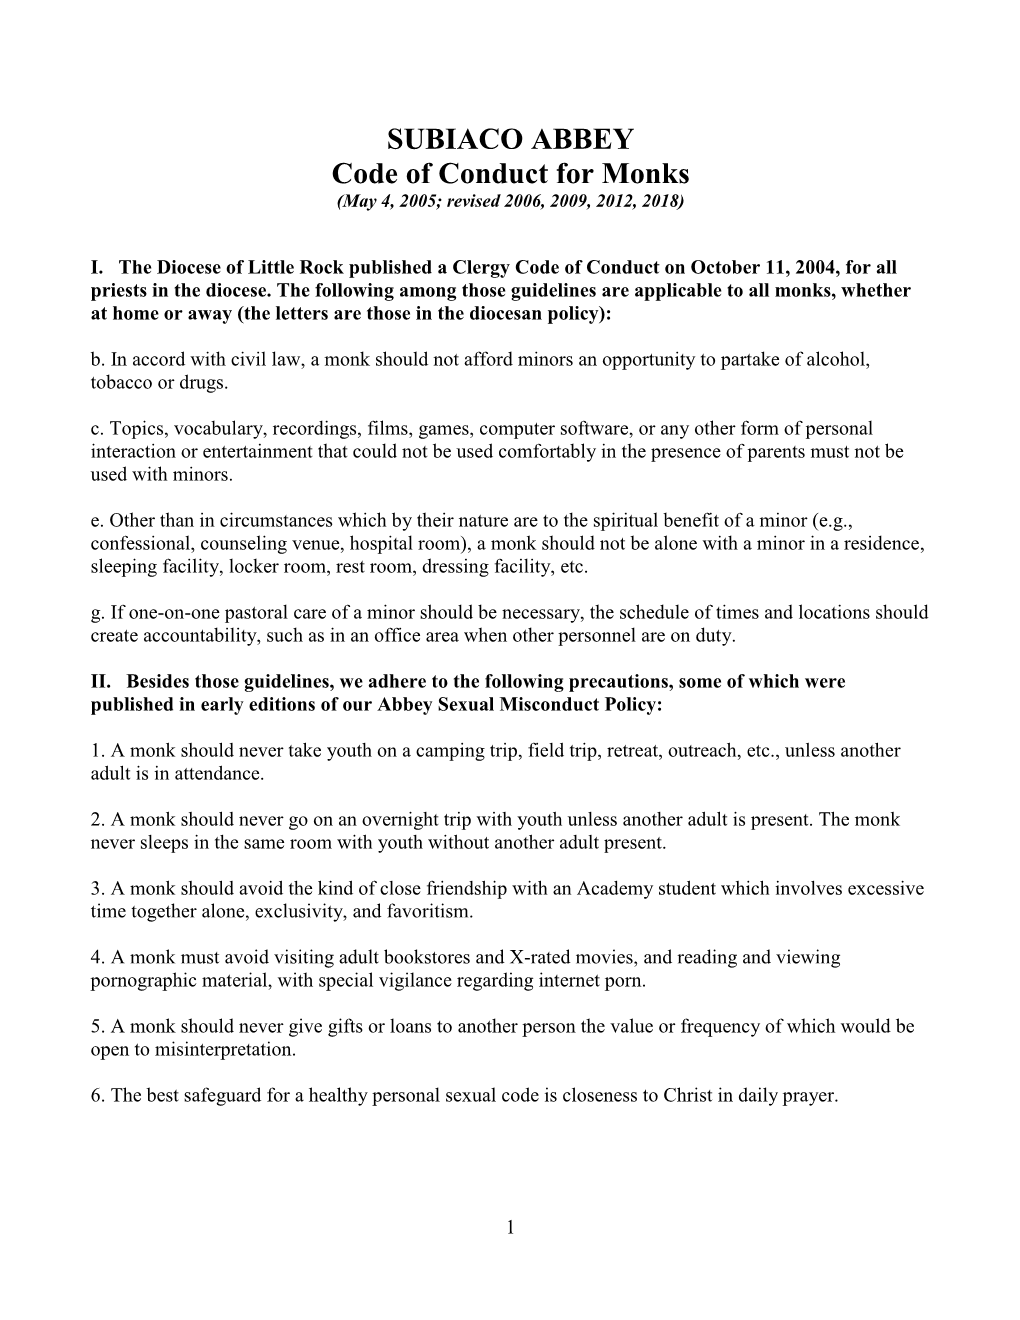 SUBIACO ABBEY Code of Conduct for Monks (May 4, 2005; Revised 2006, 2009, 2012, 2018)